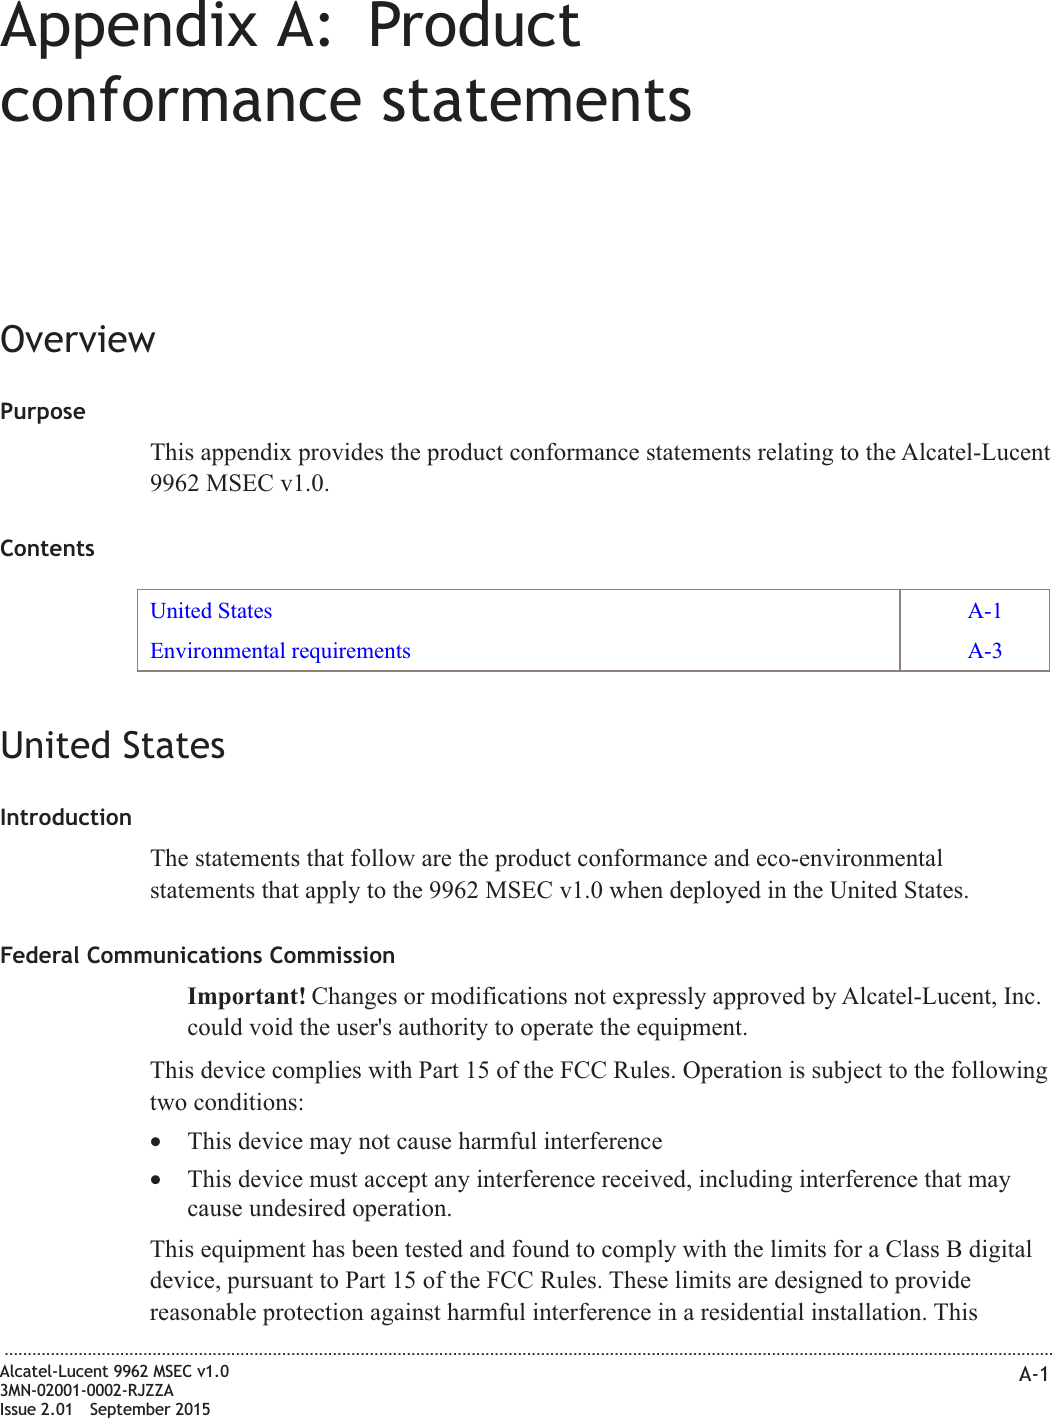 Appendix A: Productconformance statementsOverviewPurposeThis appendix provides the product conformance statements relating to the Alcatel-Lucent9962 MSEC v1.0.ContentsUnited States A-1Environmental requirements A-3United StatesIntroductionThe statements that follow are the product conformance and eco-environmentalstatements that apply to the 9962 MSEC v1.0 when deployed in the United States.Federal Communications CommissionImportant! Changes or modifications not expressly approved by Alcatel-Lucent, Inc.could void the user&apos;s authority to operate the equipment.This device complies with Part 15 of the FCC Rules. Operation is subject to the followingtwo conditions:•This device may not cause harmful interference•This device must accept any interference received, including interference that maycause undesired operation.This equipment has been tested and found to comply with the limits for a Class B digitaldevice, pursuant to Part 15 of the FCC Rules. These limits are designed to providereasonable protection against harmful interference in a residential installation. This...................................................................................................................................................................................................................................Alcatel-Lucent 9962 MSEC v1.03MN-02001-0002-RJZZAIssue 2.01 September 2015A-1PRELIMINARYPRELIMINARY